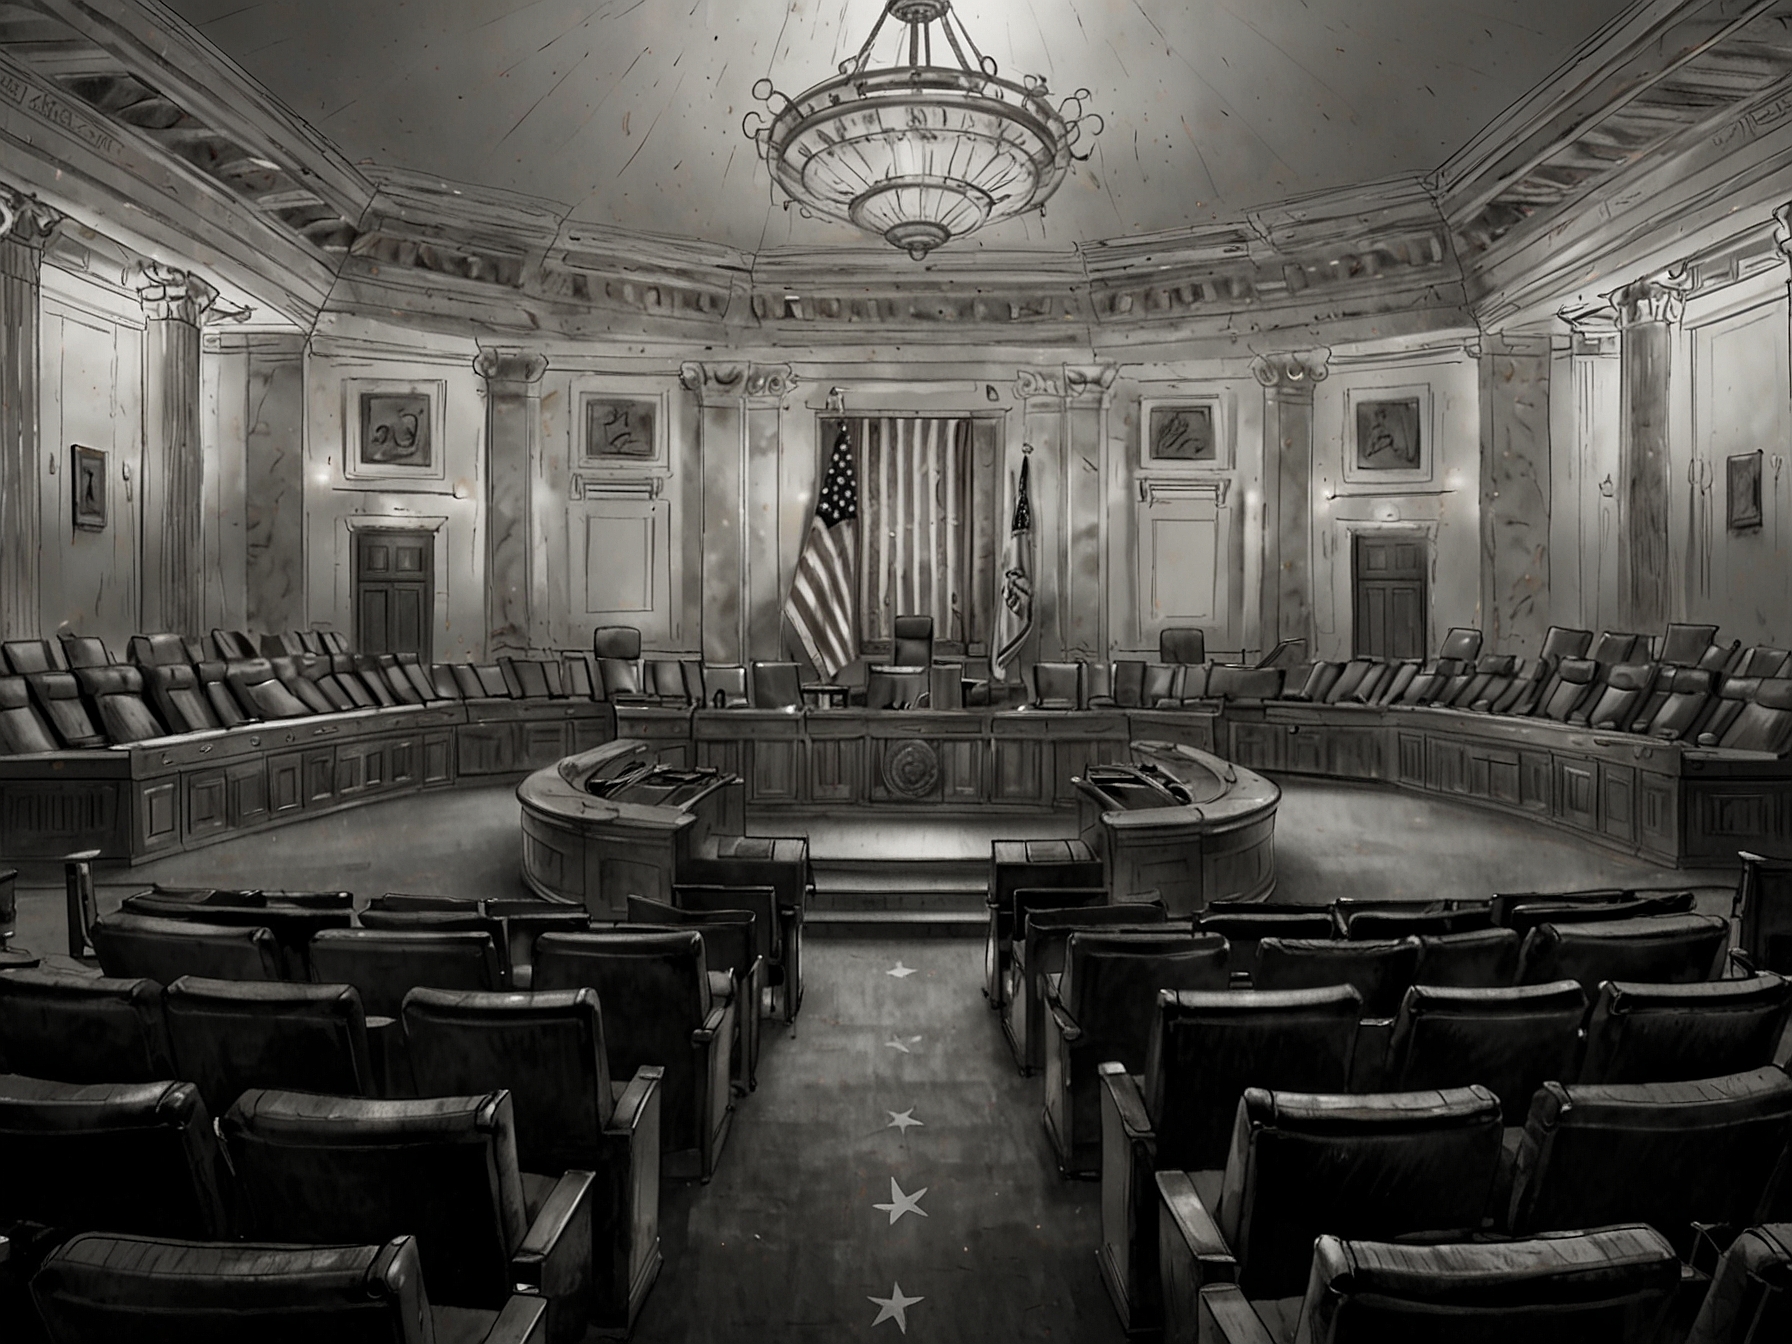 A divided image showing the Senate chamber on one side and the House of Representatives chamber on the other, representing the two crucial chambers of the US Congress and their roles.